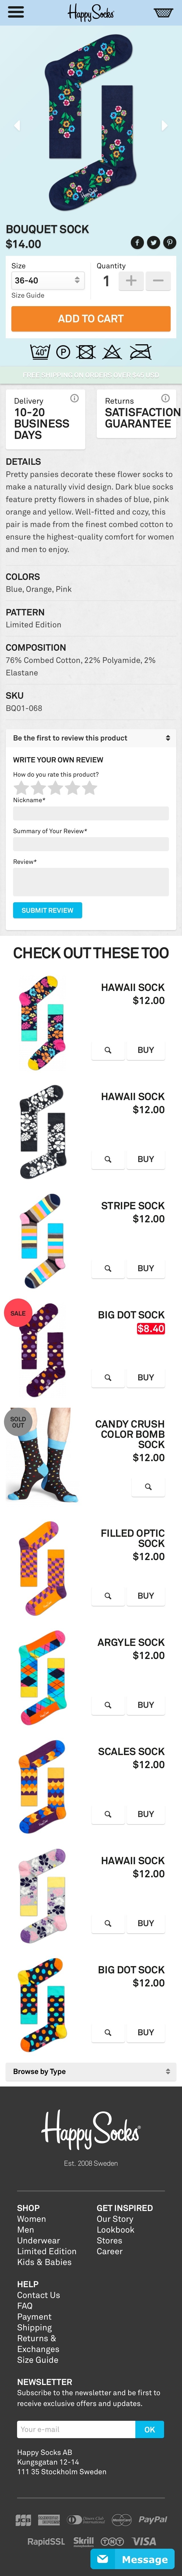 Happy Socks mobile product page design example